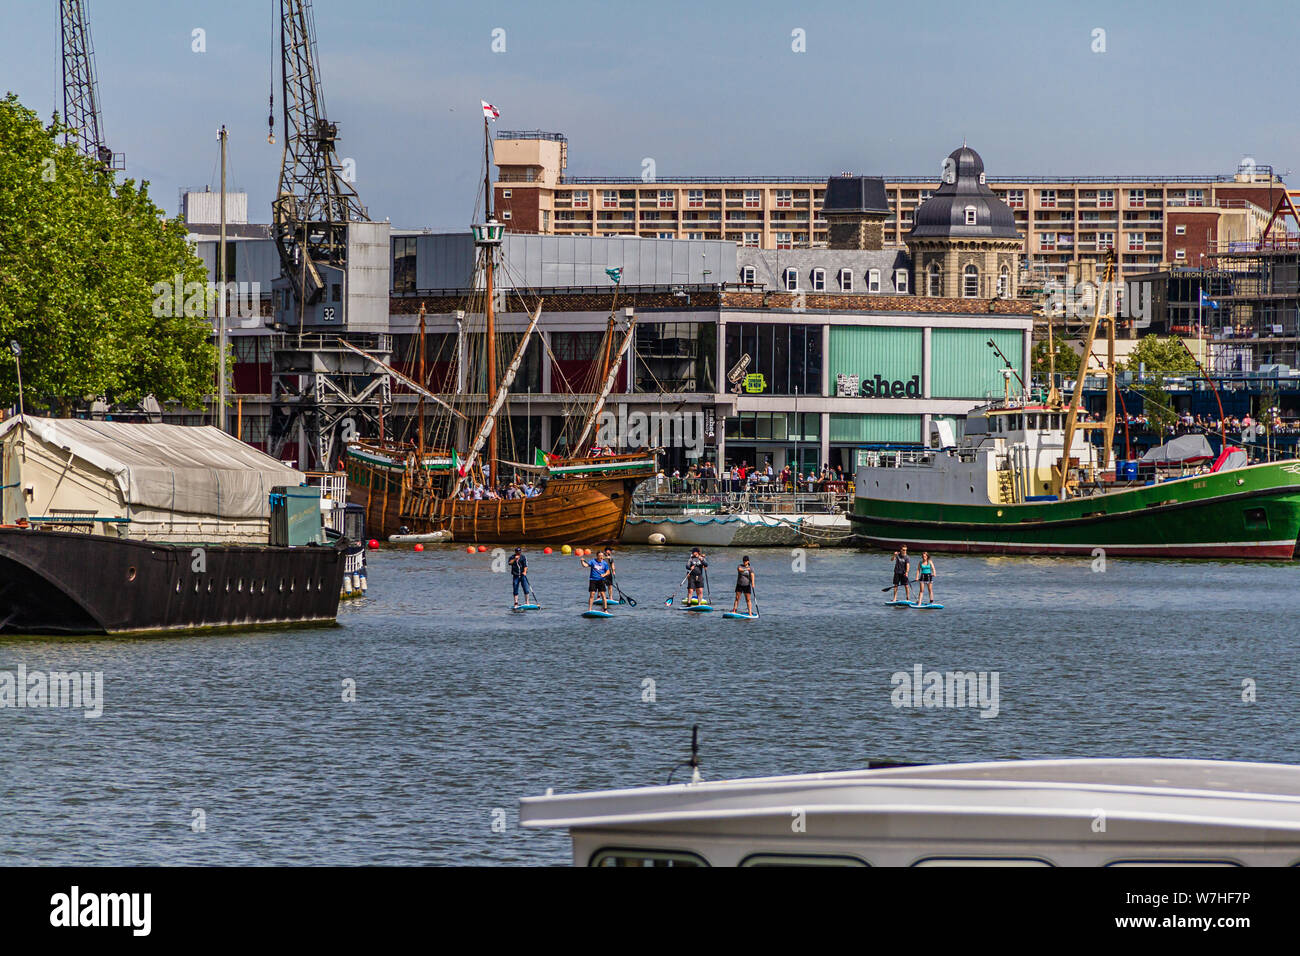 A group of paddle boarders enjoying the Floating Harbour near the M-Shed heritage museum on Prince's Wharf, Bristol, UK. July 2019. Stock Photo